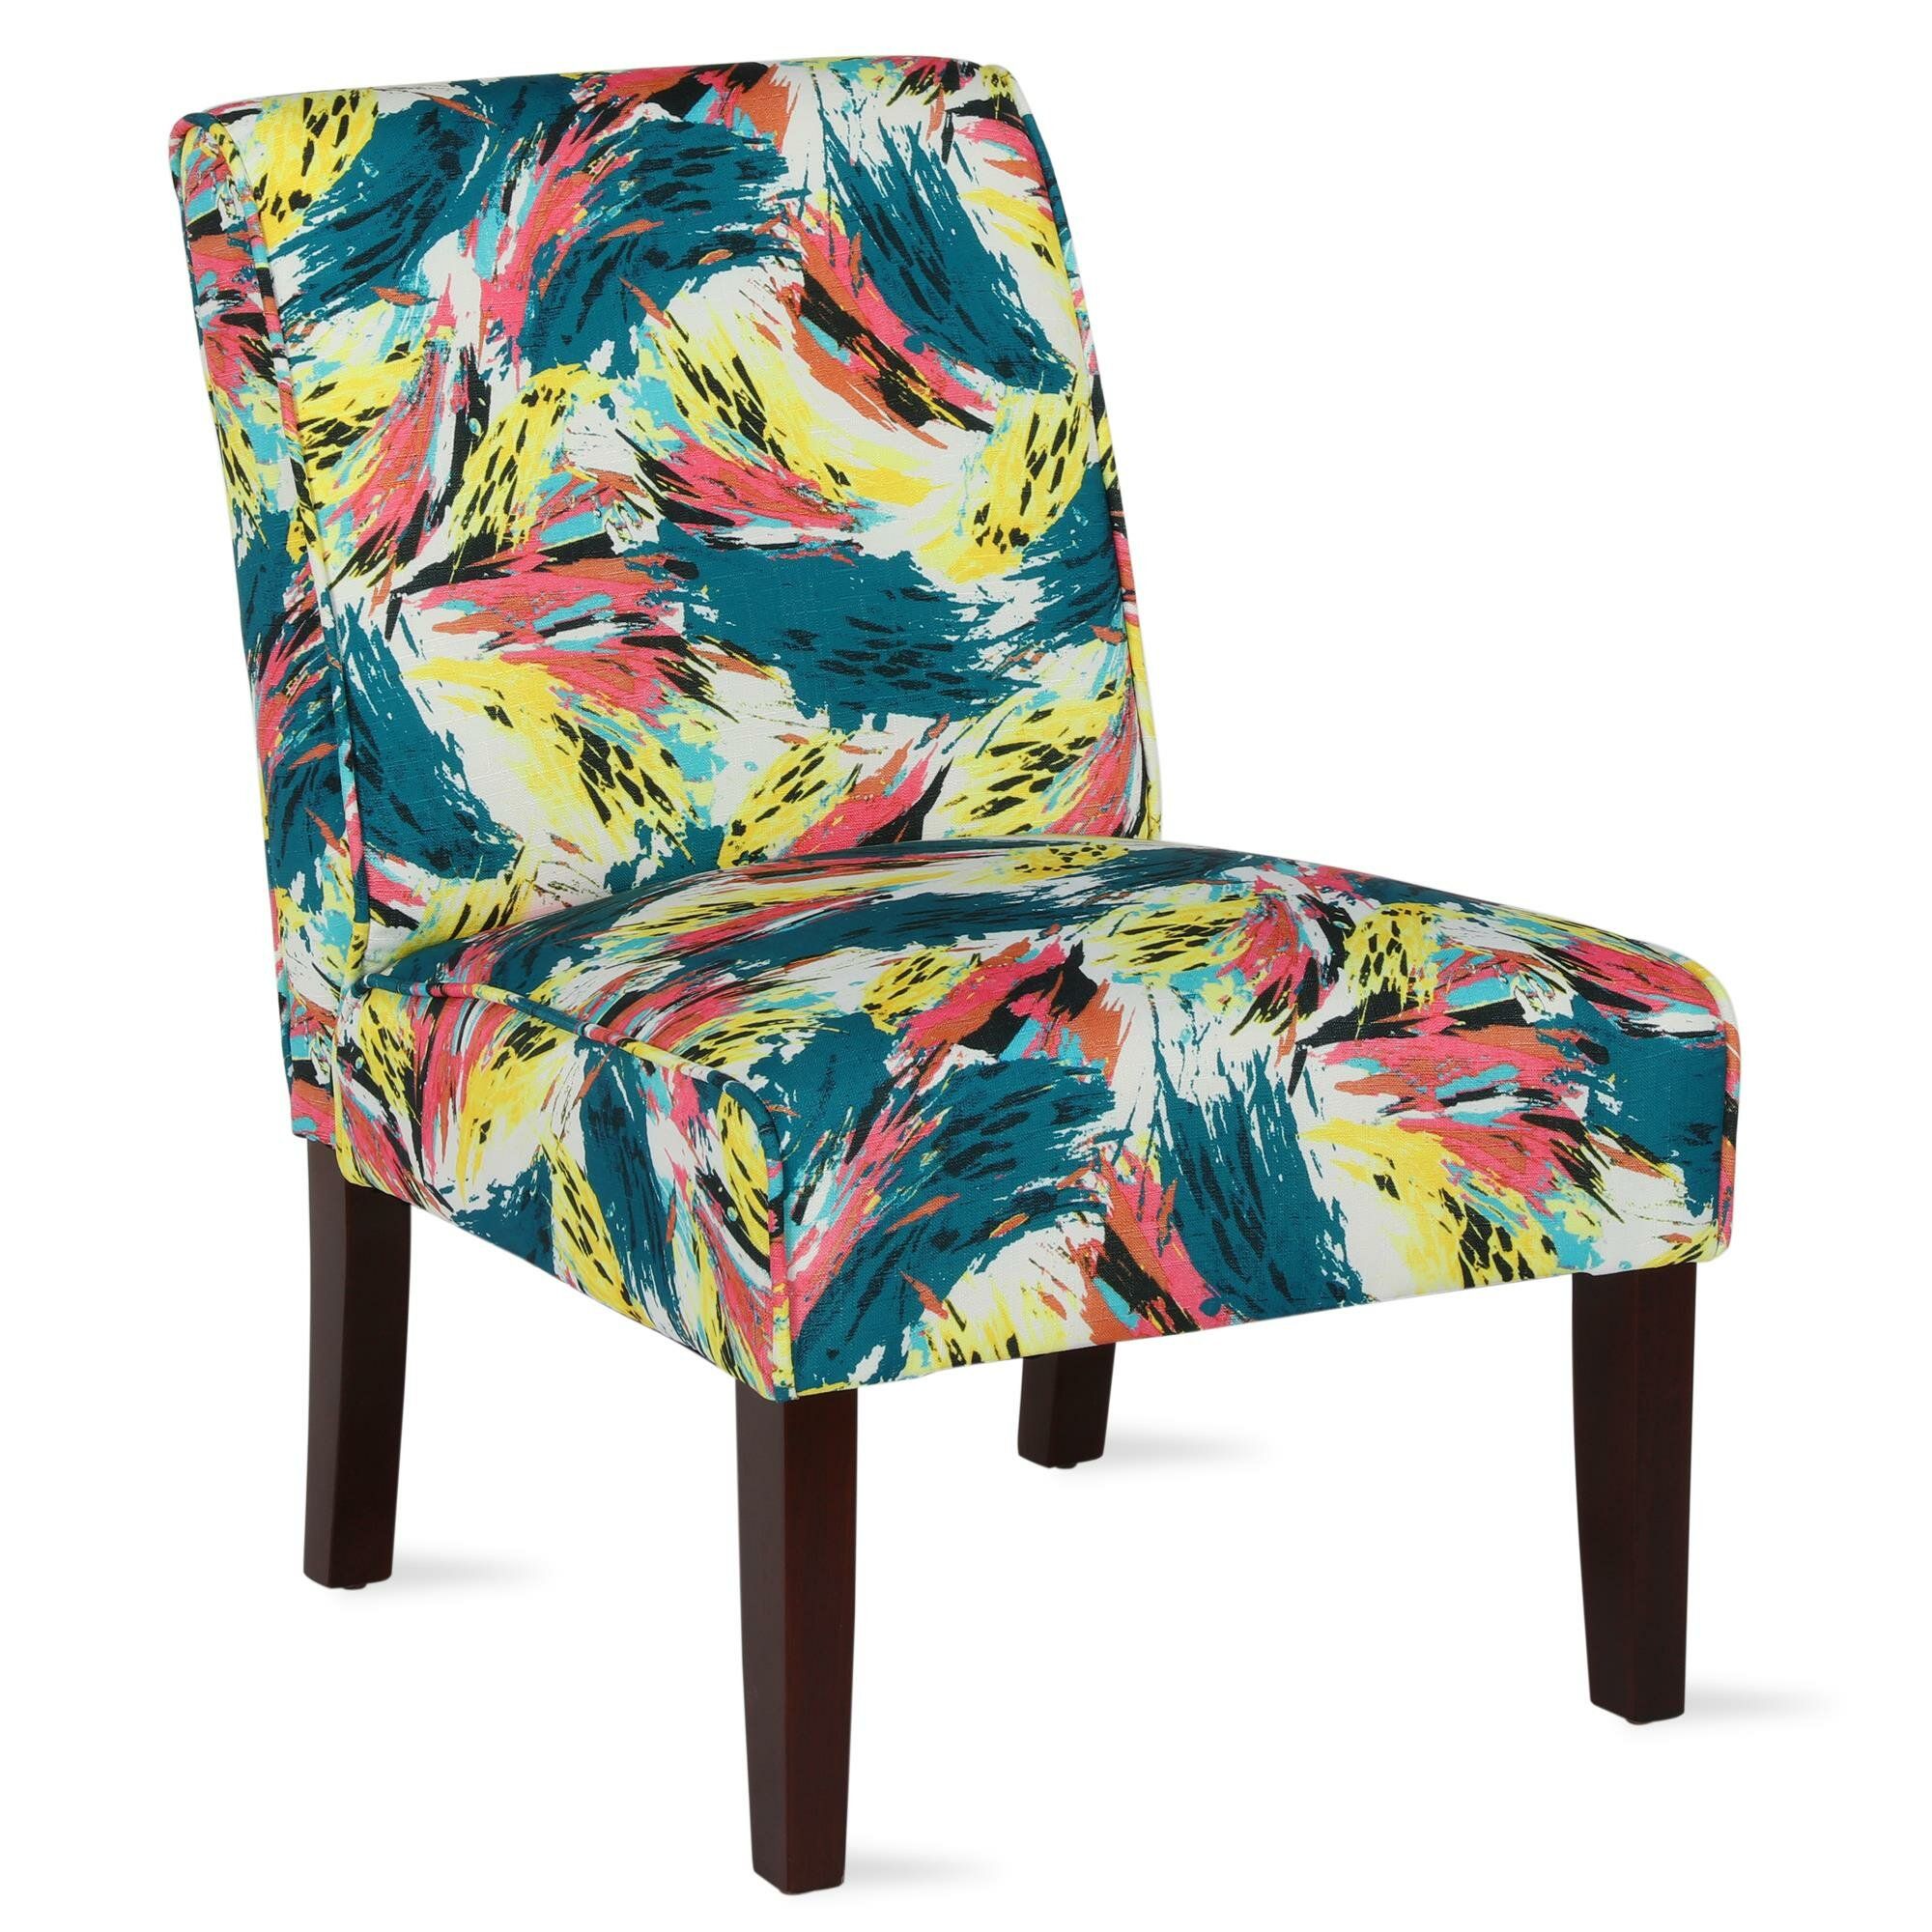 Floral Accent Chairs Under $150 You'Ll Love In 2021 | Wayfair Pertaining To Ansby Barrel Chairs (View 4 of 15)